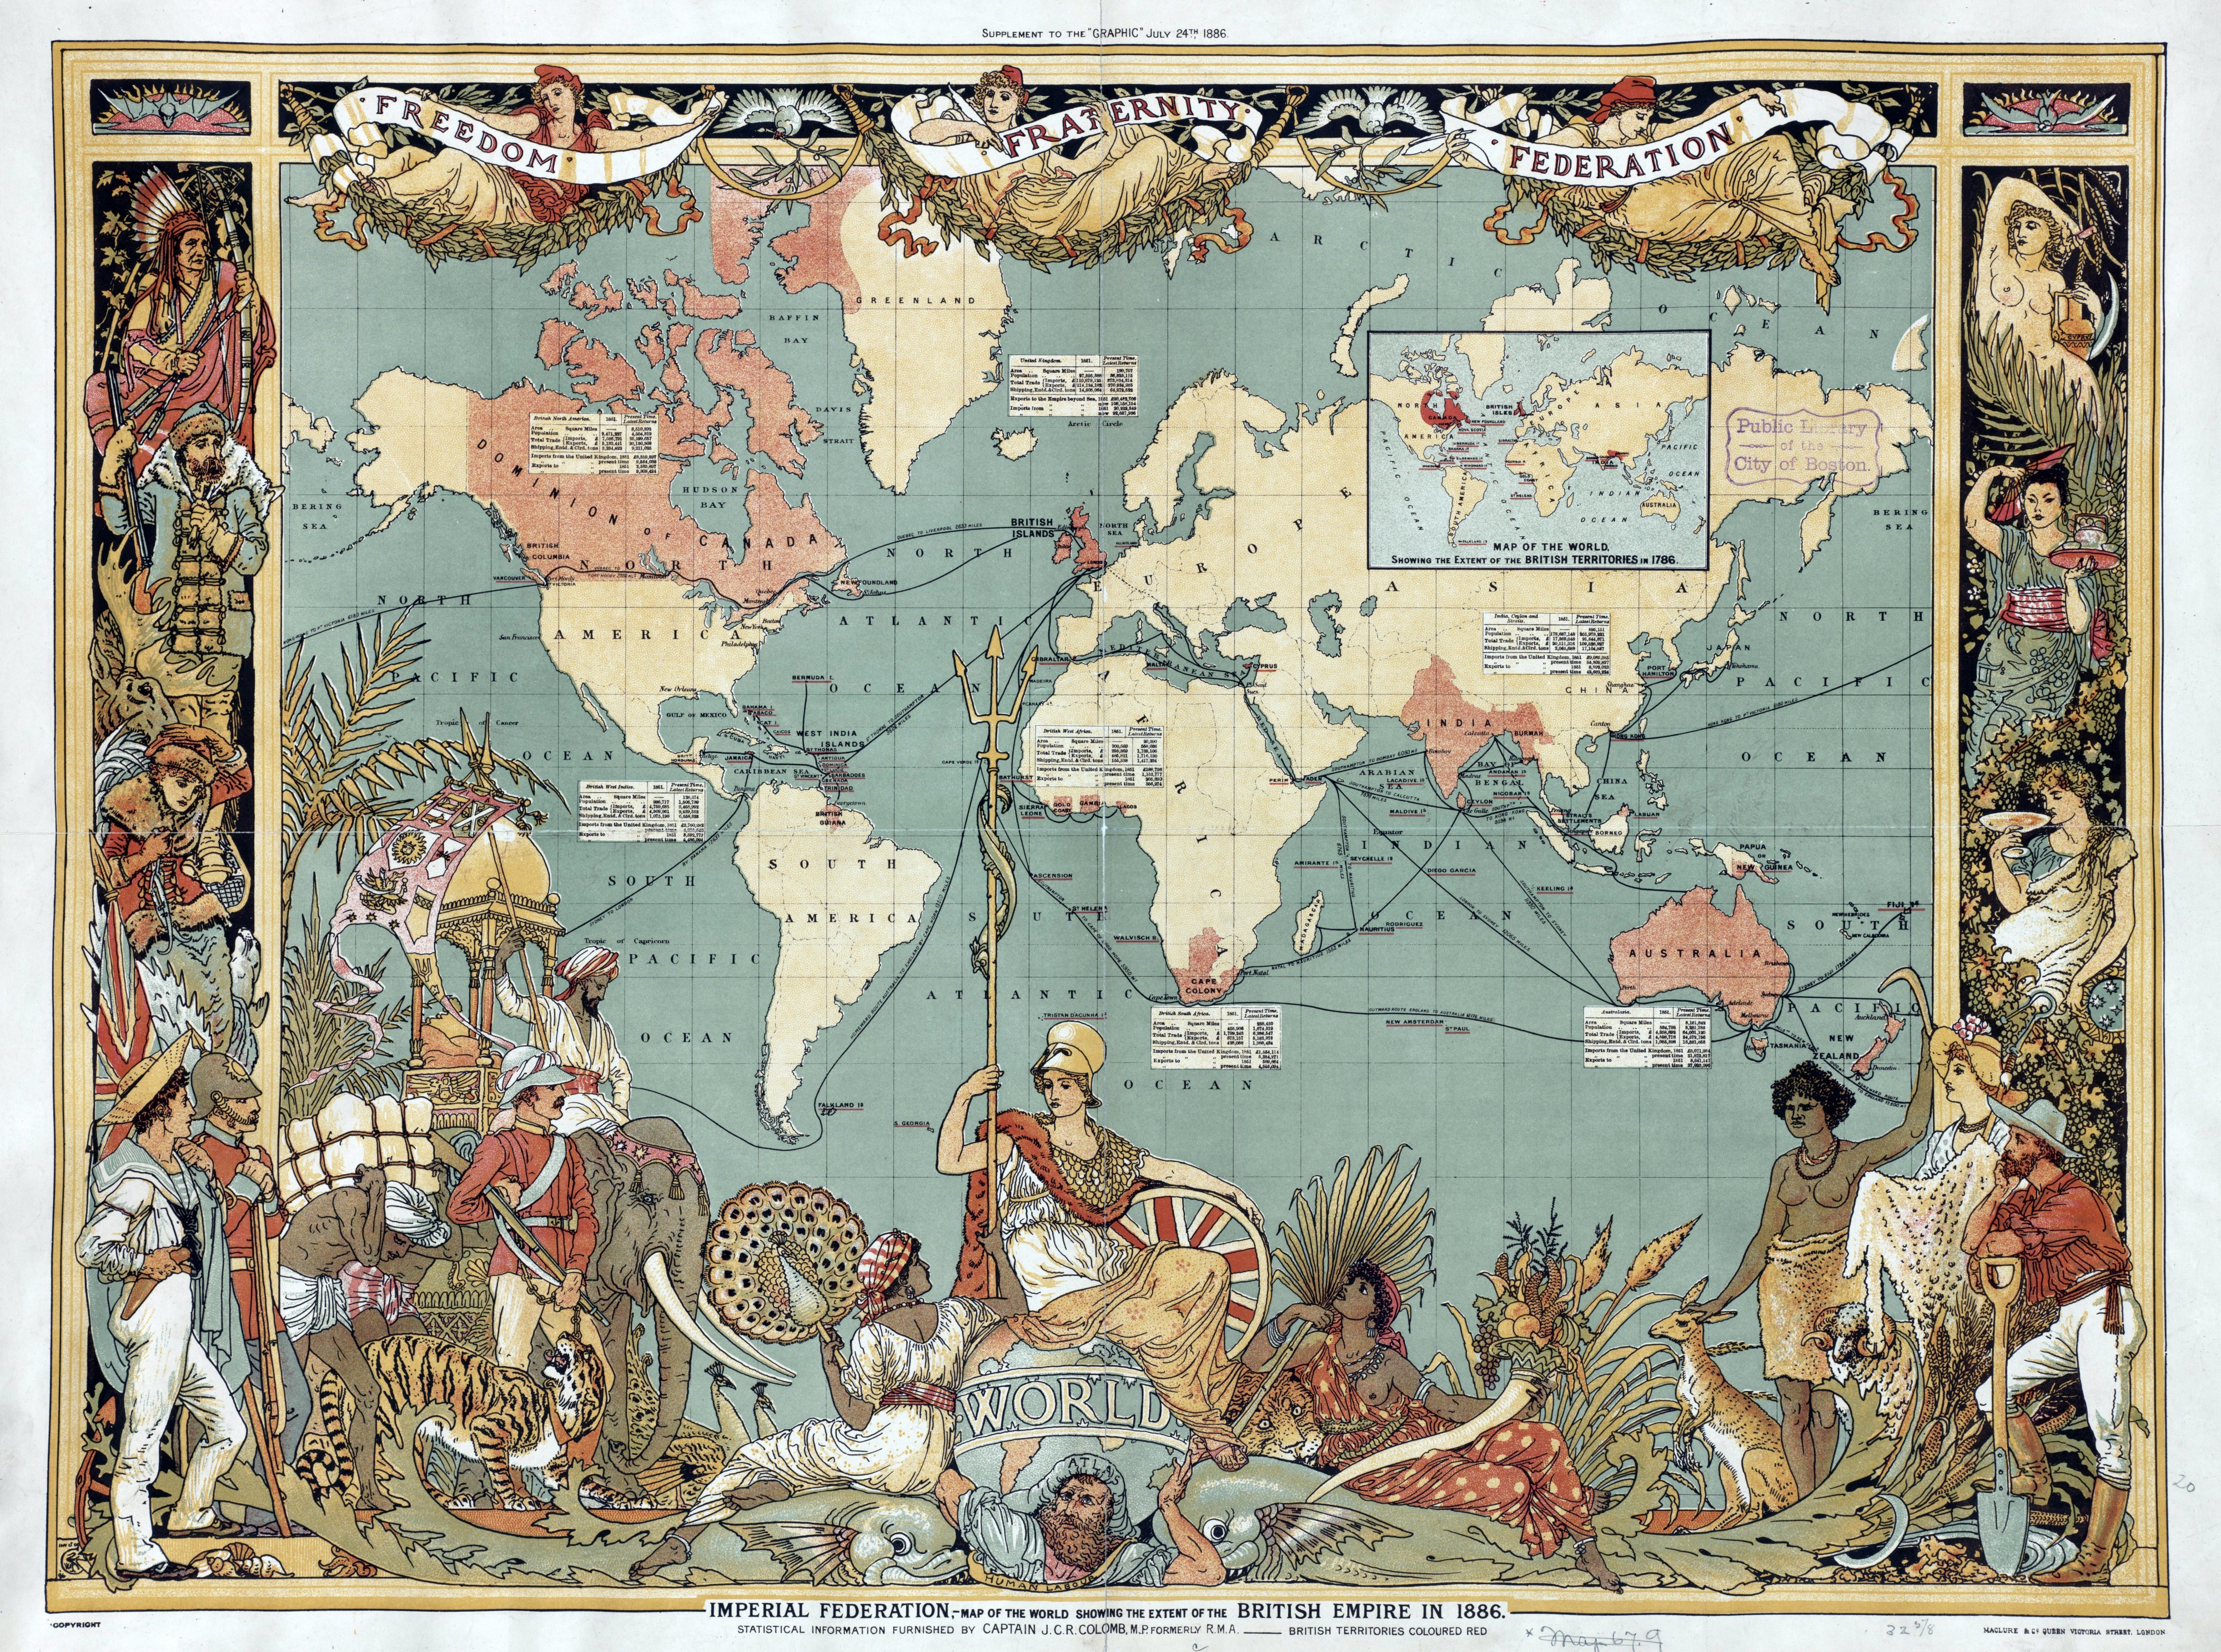 cool looking map of the British Empire